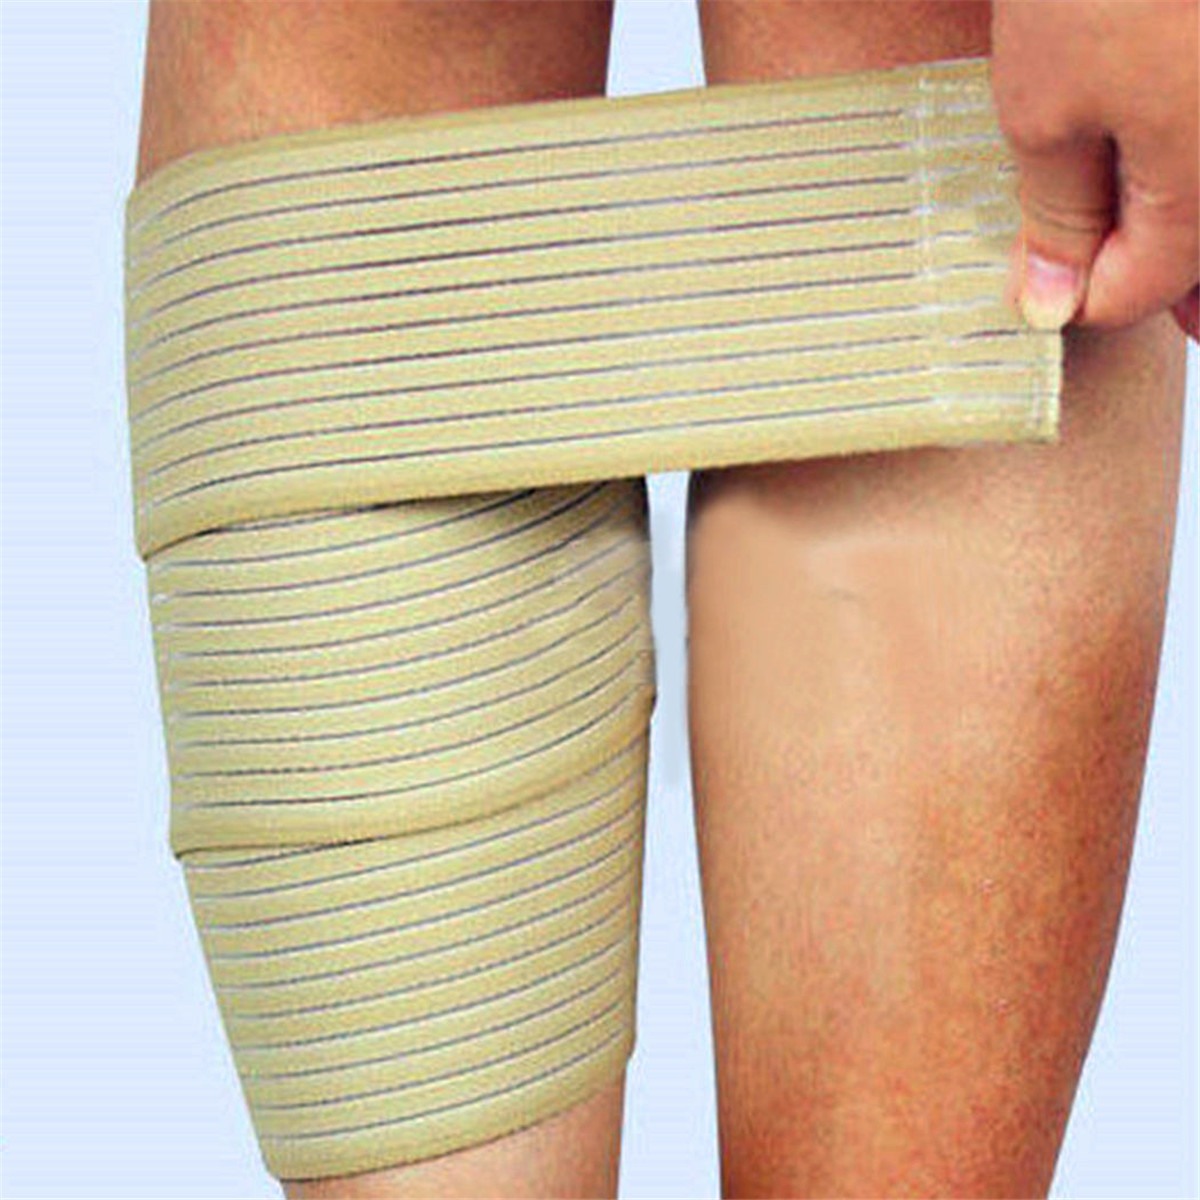 Elastic-Sports-Bandage-Knee-Pad-Support-Wrap-Knee-Band-Brace-Elbow-Calf-Arm-Support-950117-6